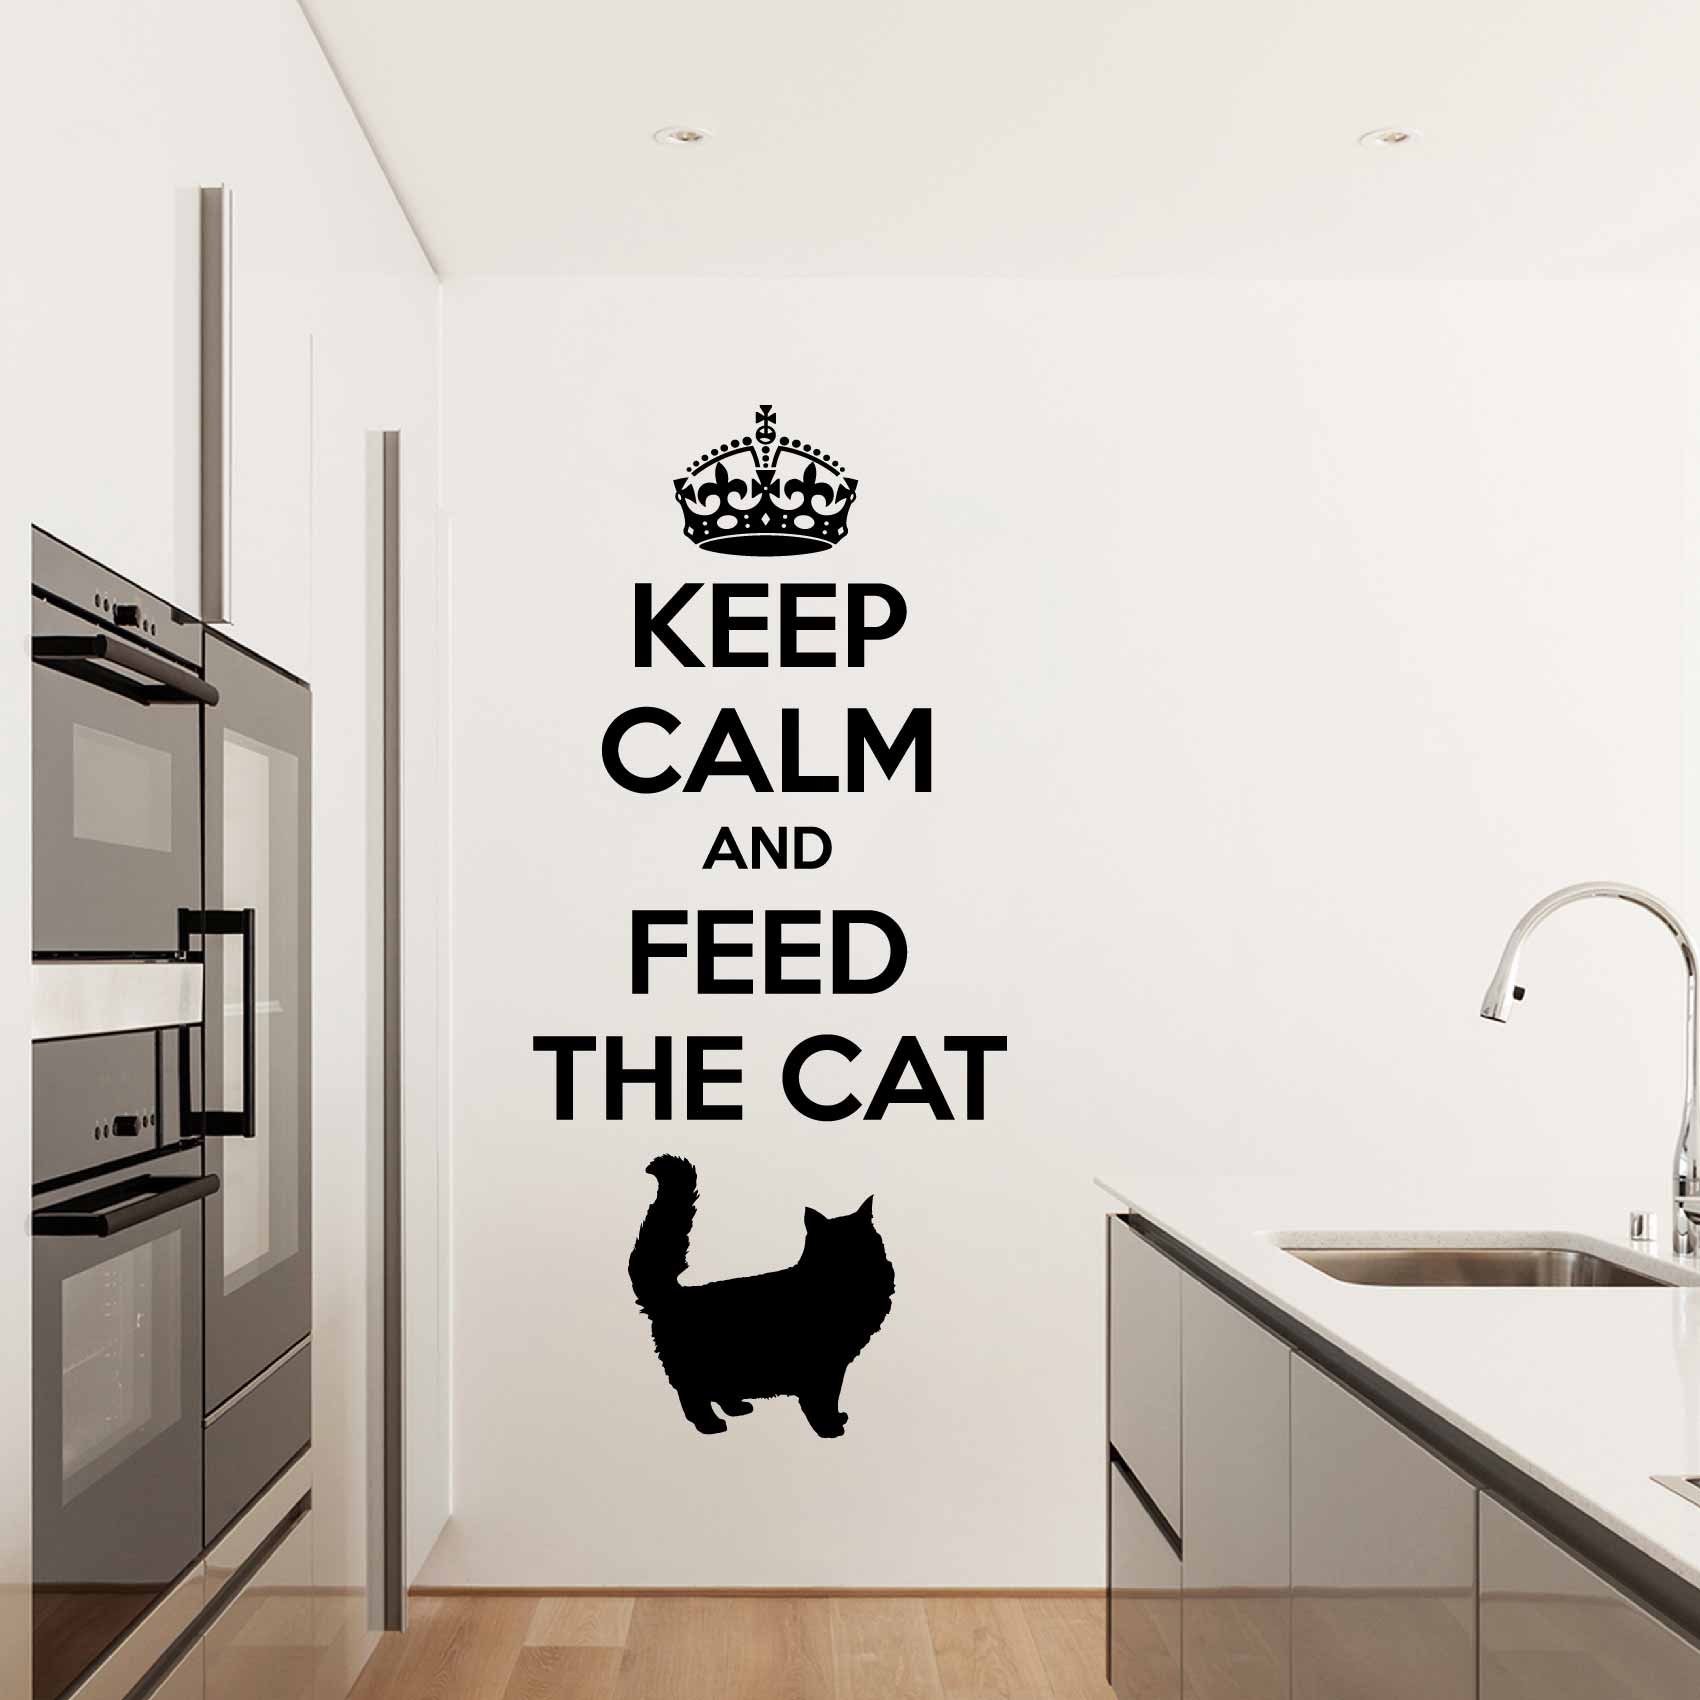 https://media.cdnws.com/_i/61411/276/771/78/stickers-keep-calm-and-feed-the-cat-ref21chat-autocollant-chat-norvegien-deco-sticker-cuisine-stickers-muraux.jpeg